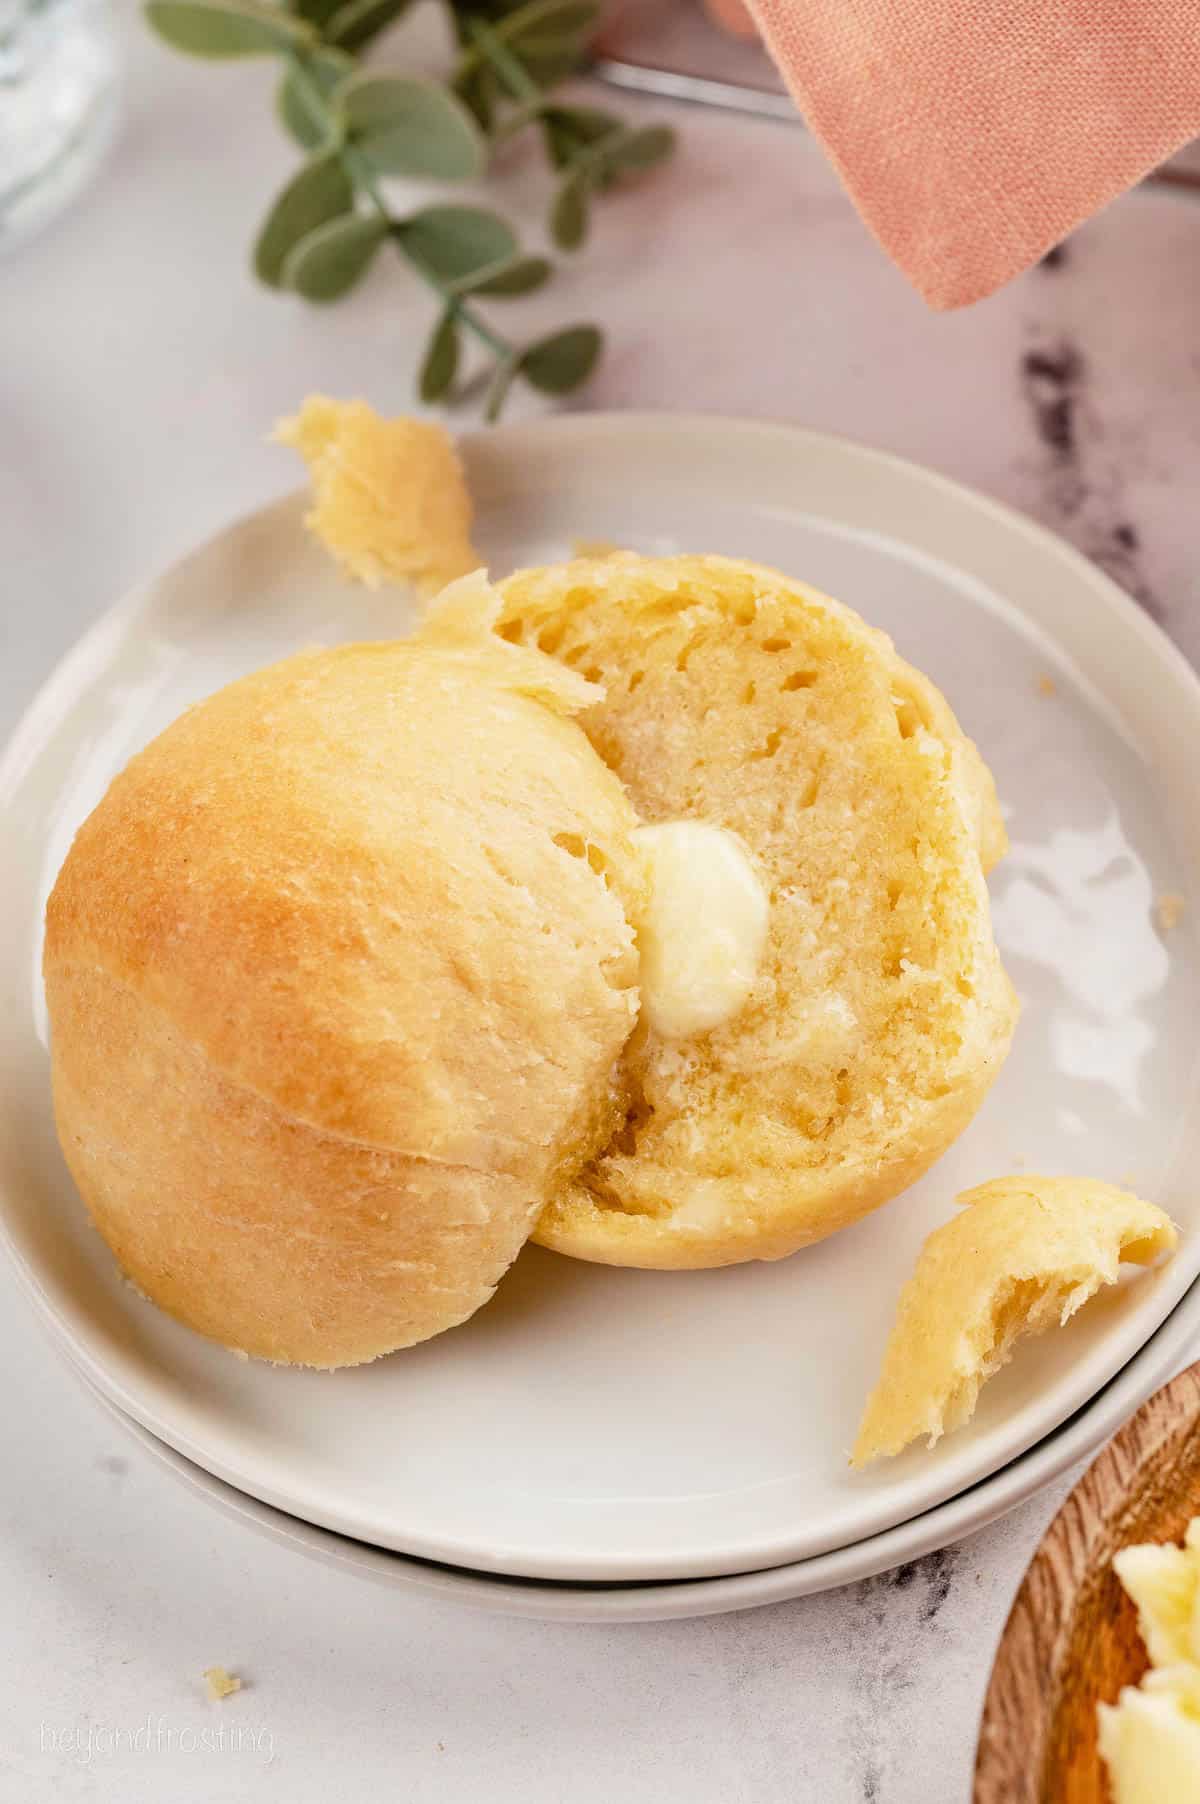 Two halves of a dinner roll on a white plate, with a pat of butter melting on one half.